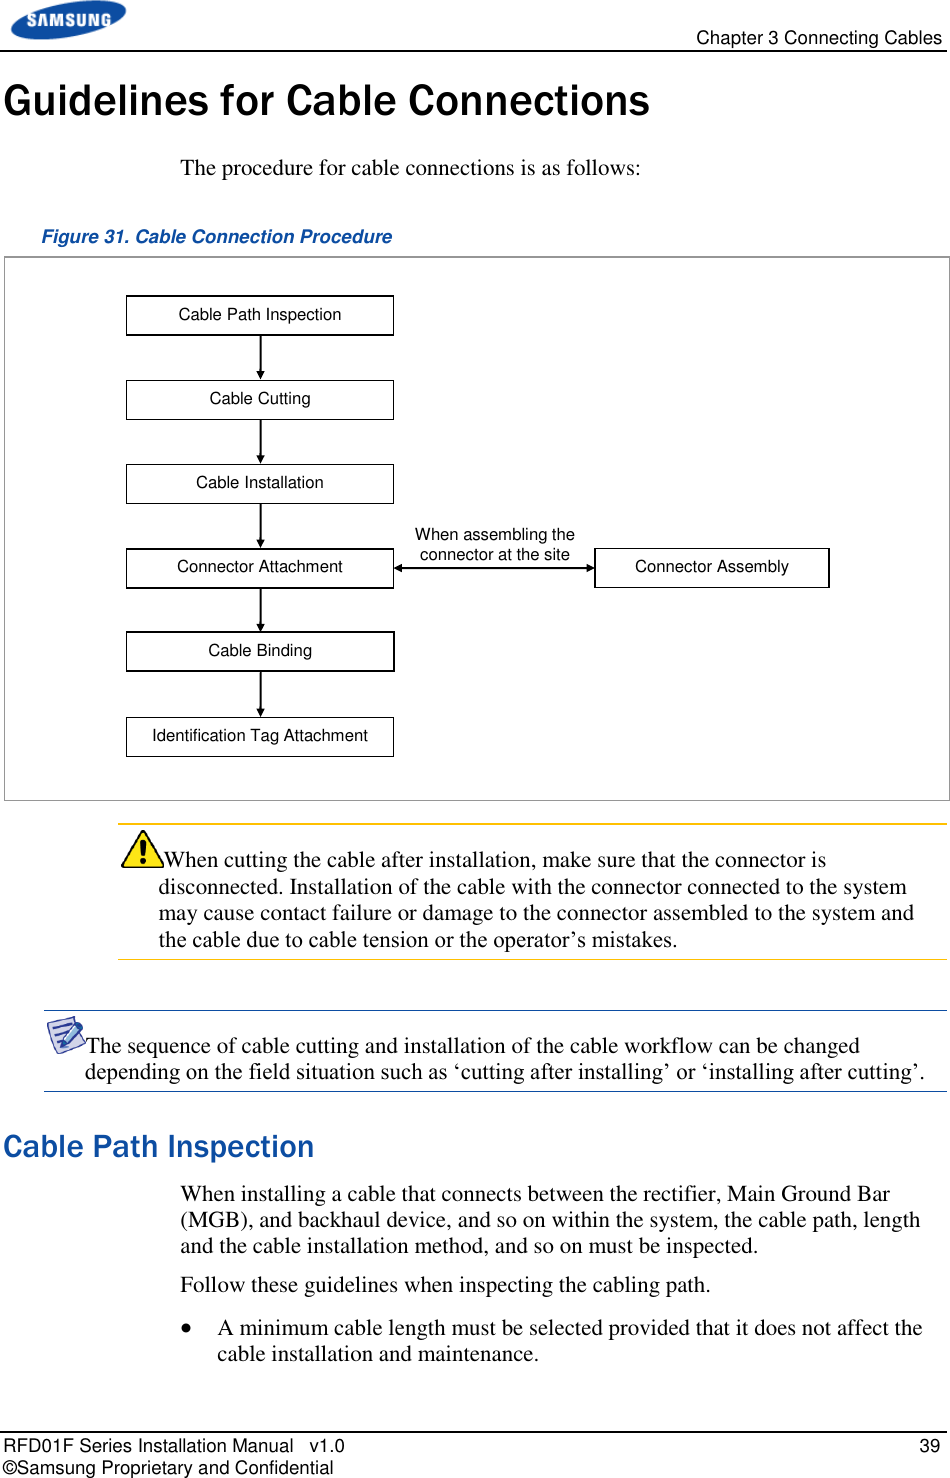   Chapter 3 Connecting Cables RFD01F Series Installation Manual   v1.0   39 © Samsung Proprietary and Confidential Guidelines for Cable Connections The procedure for cable connections is as follows:  Figure 31. Cable Connection Procedure  When cutting the cable after installation, make sure that the connector is disconnected. Installation of the cable with the connector connected to the system may cause contact failure or damage to the connector assembled to the system and the cable due to cable tension or the operator’s mistakes.  The sequence of cable cutting and installation of the cable workflow can be changed depending on the field situation such as ‘cutting after installing’ or ‘installing after cutting’. Cable Path Inspection When installing a cable that connects between the rectifier, Main Ground Bar (MGB), and backhaul device, and so on within the system, the cable path, length and the cable installation method, and so on must be inspected. Follow these guidelines when inspecting the cabling path.  A minimum cable length must be selected provided that it does not affect the cable installation and maintenance. Cable Installation Connector Attachment Identification Tag Attachment Connector Assembly When assembling the connector at the site Cable Path Inspection Cable Cutting Cable Binding 